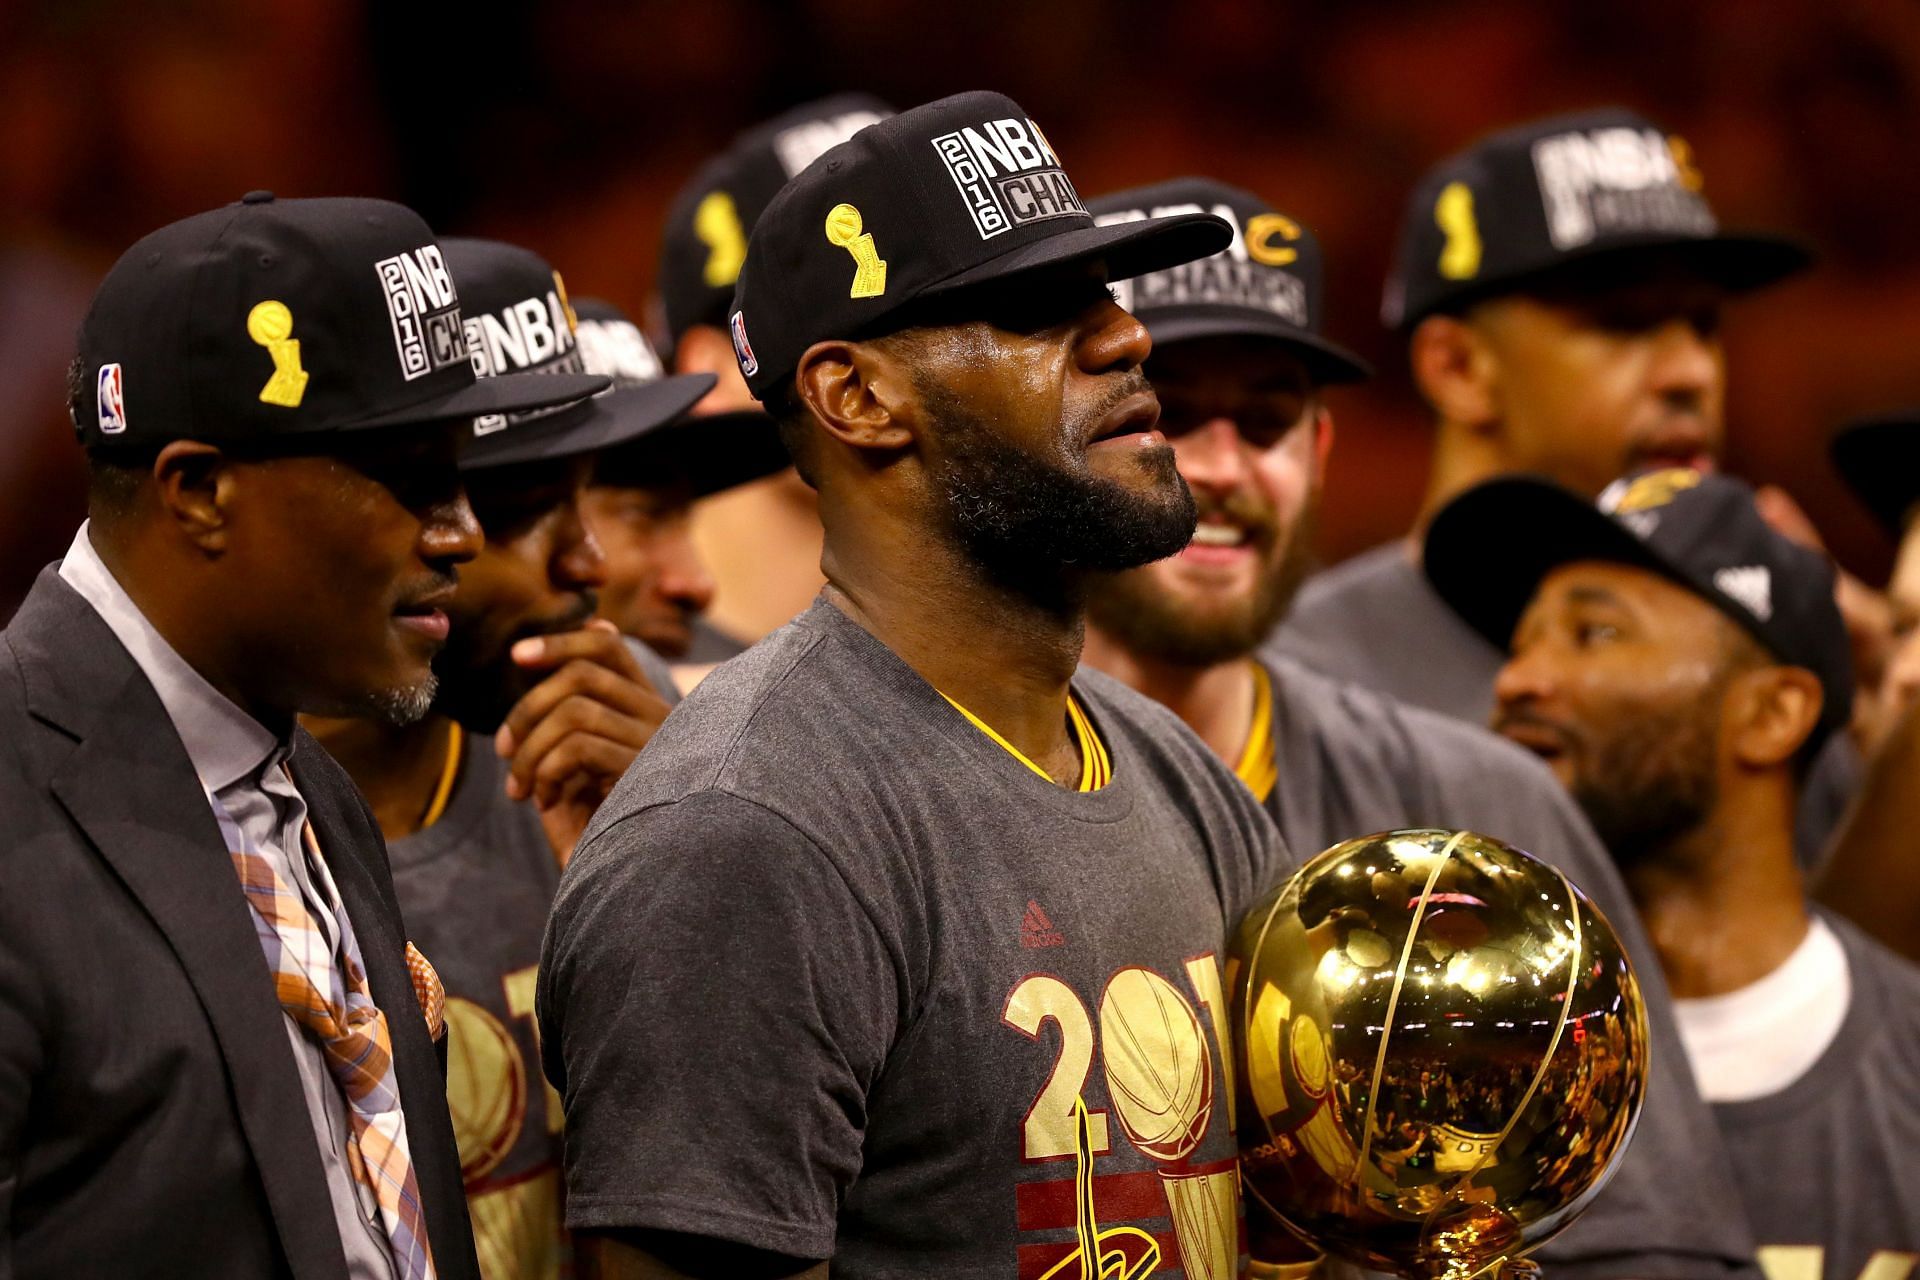 King James with the championship after the 2016 NBA Finals.